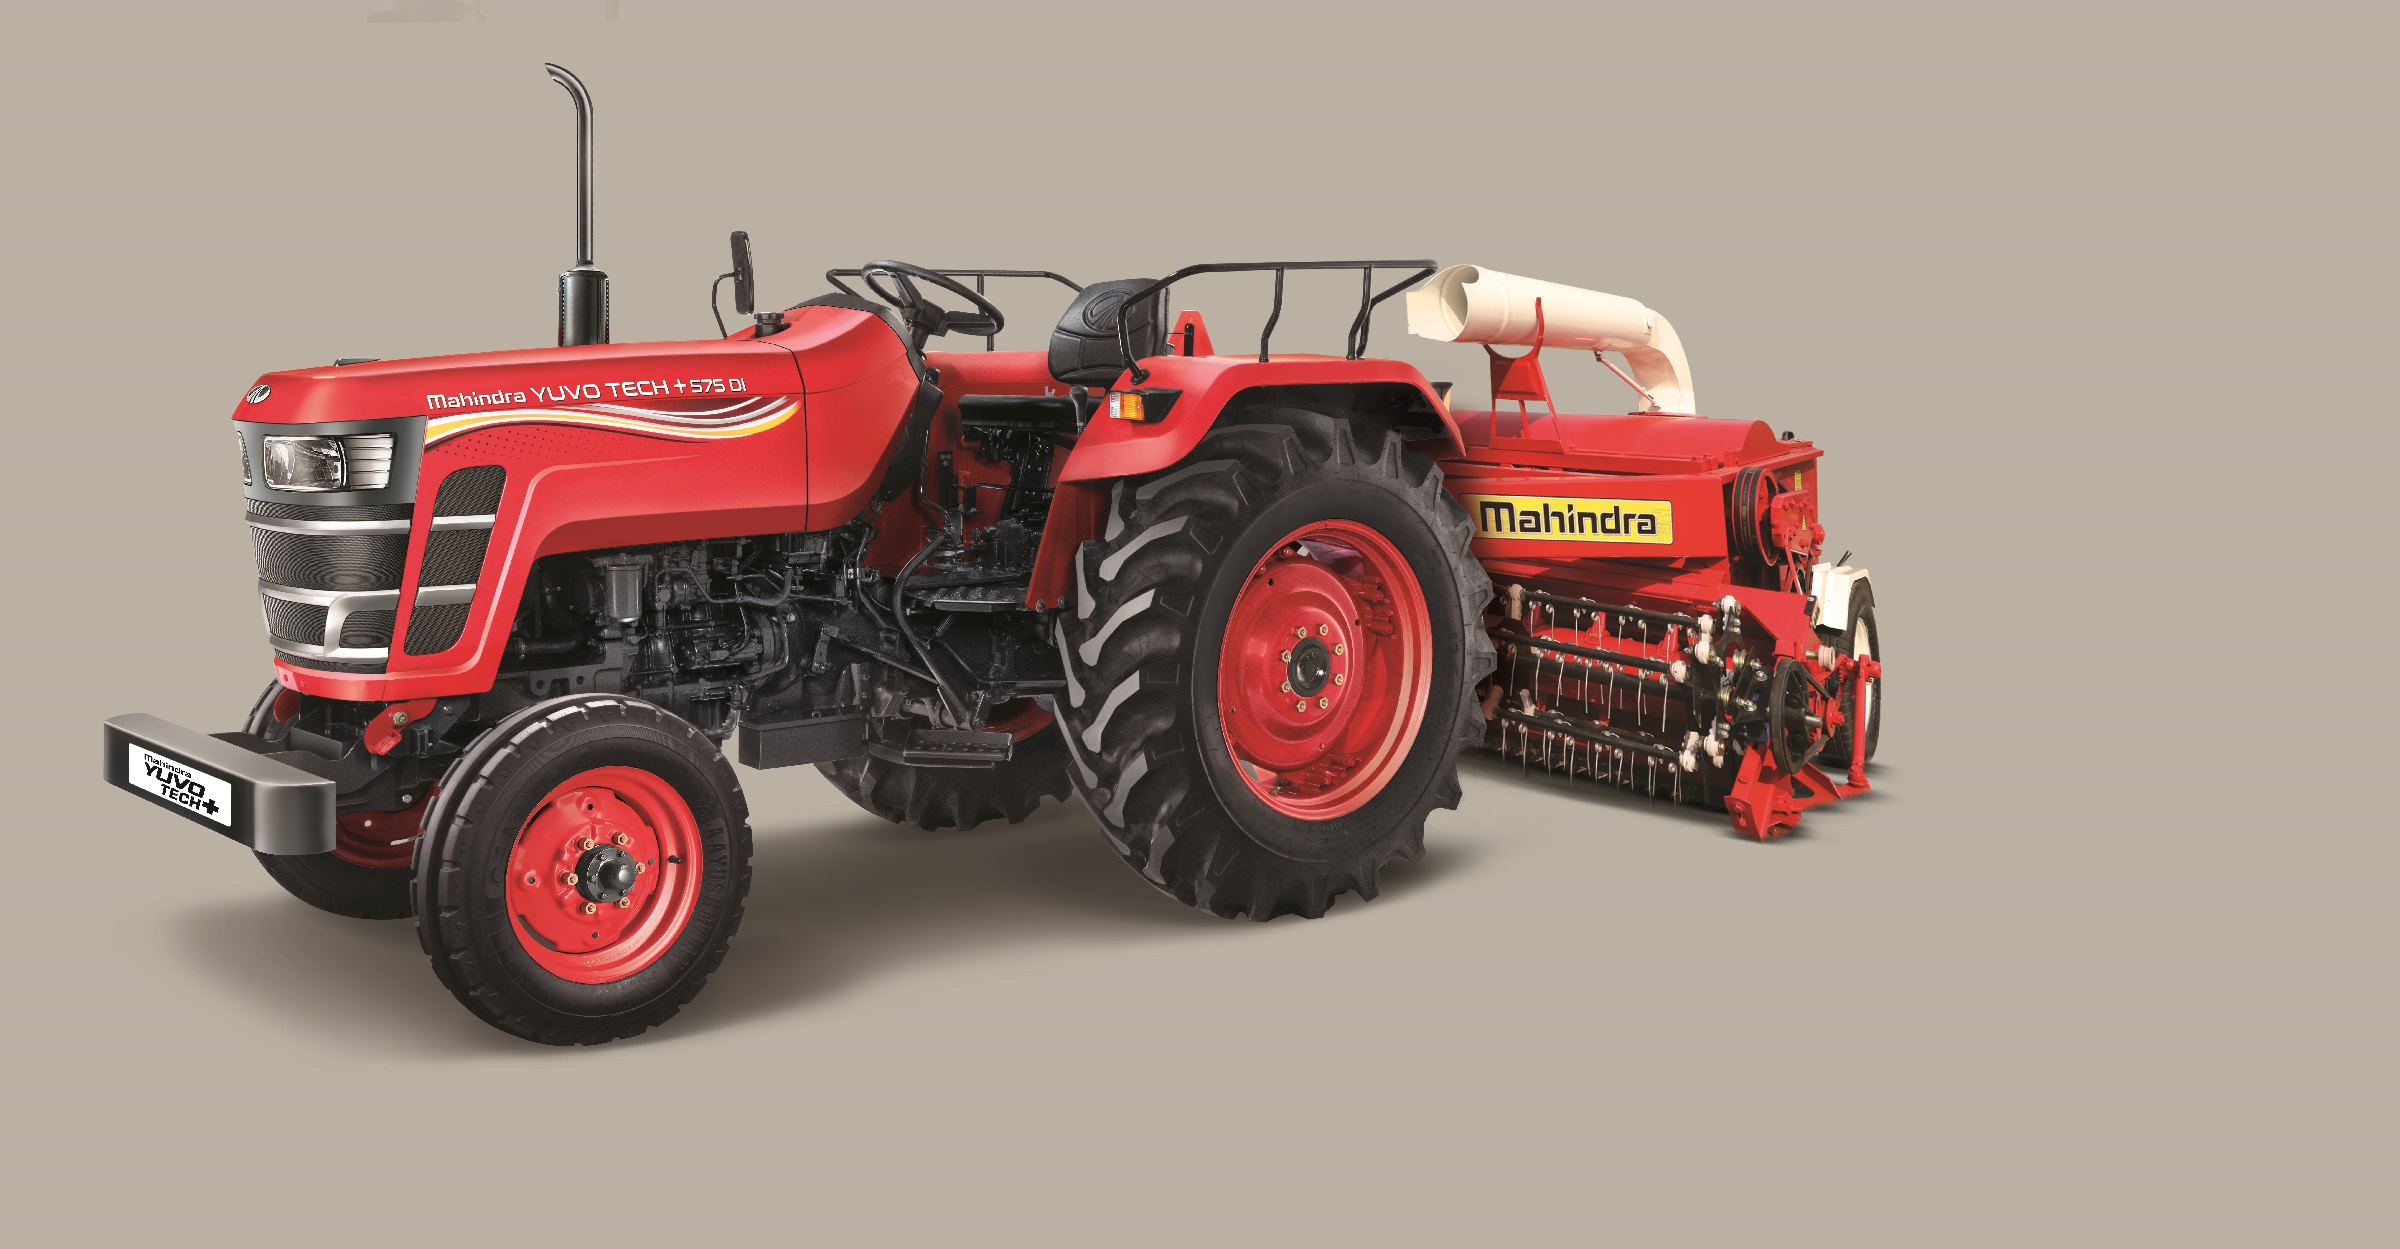 mahindra-tractors-launches-six-new-tractors-models-from-the-yuvo-tech-series-in-rajasthan